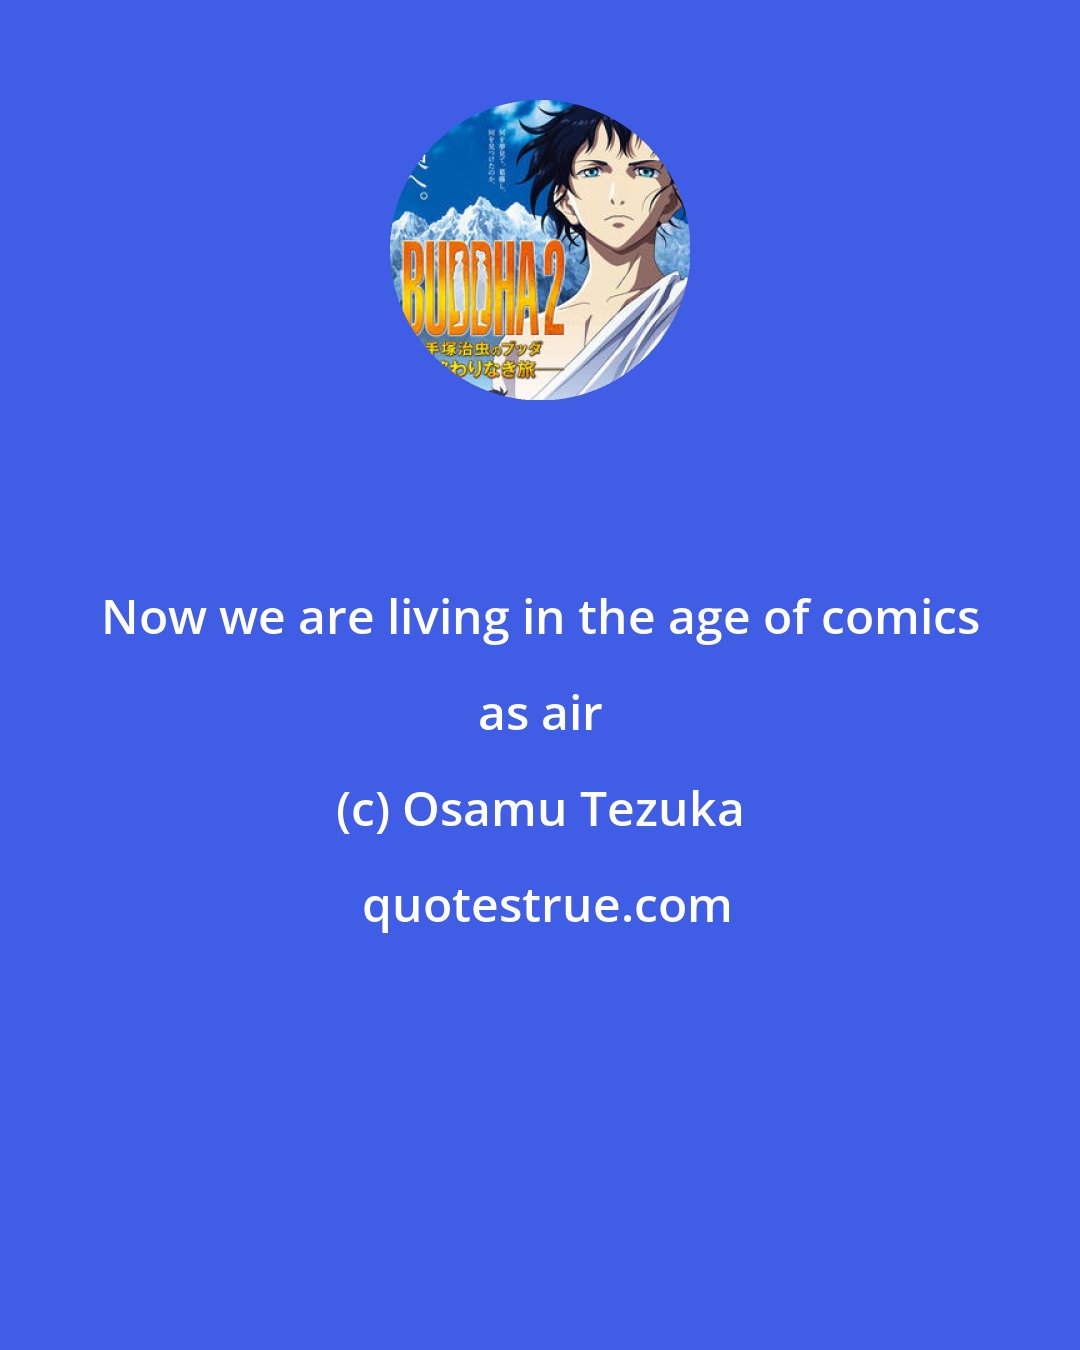 Osamu Tezuka: Now we are living in the age of comics as air